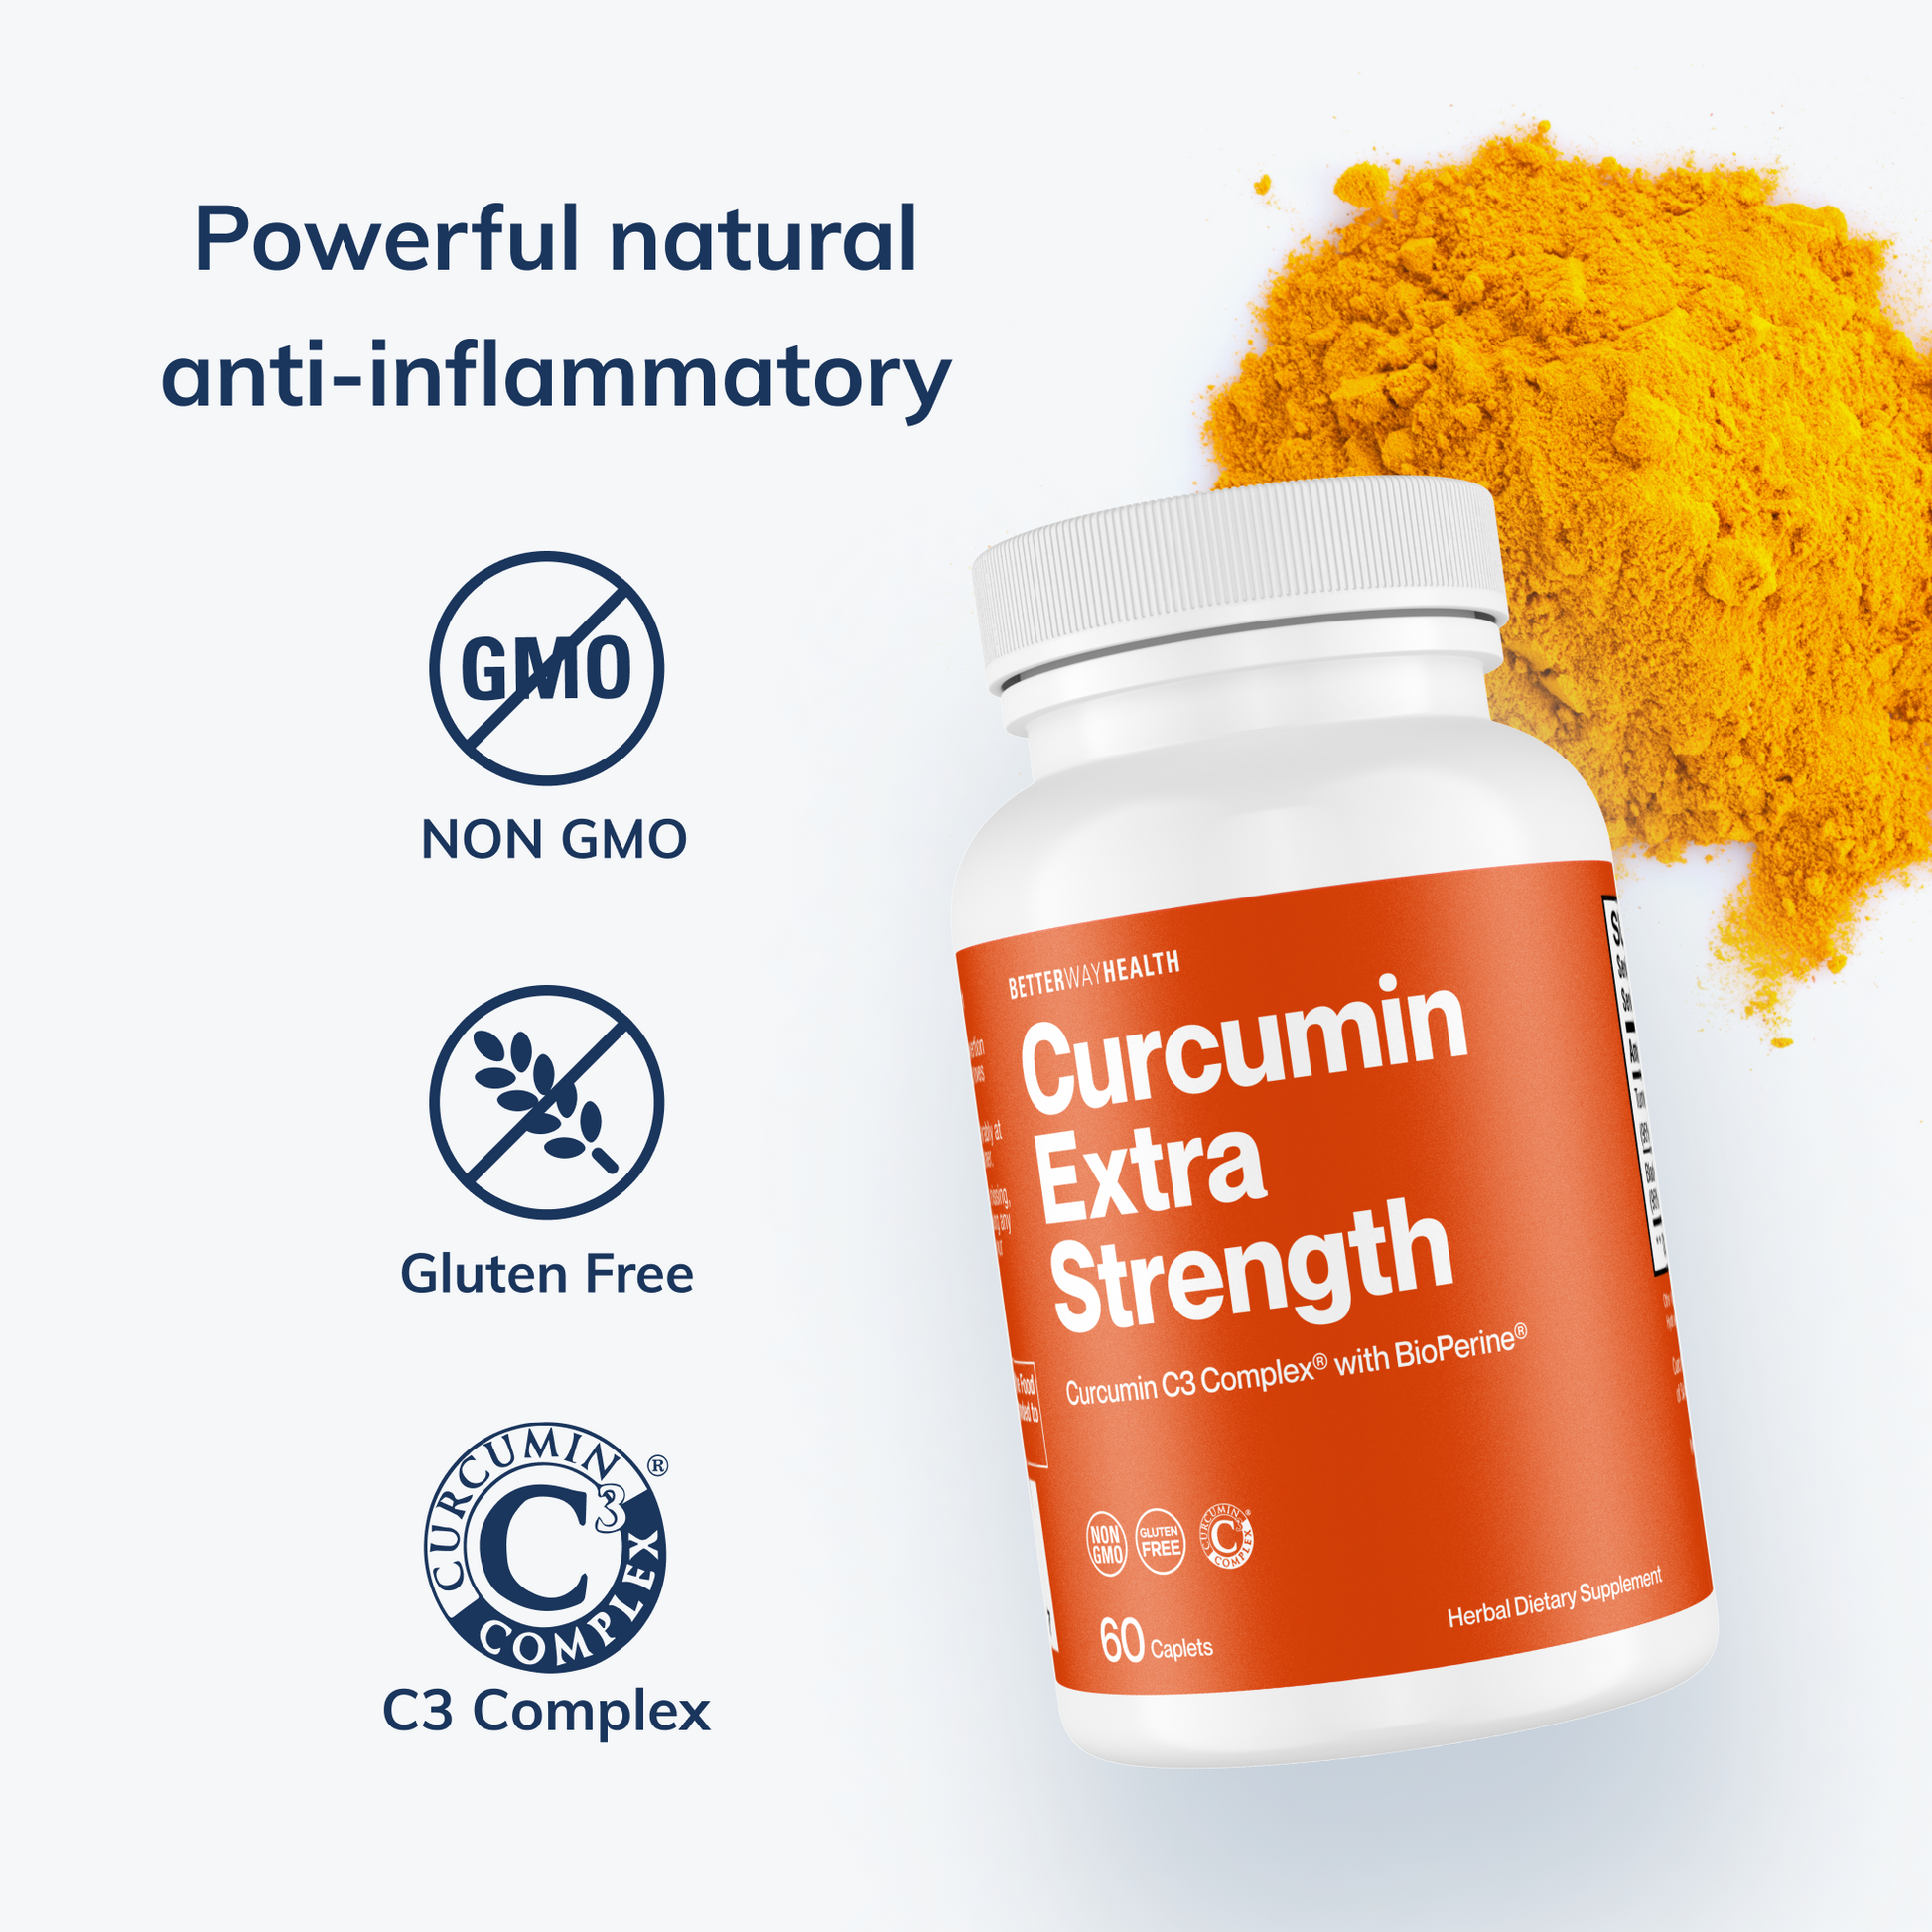  natural anti inflammatory image of curcumin extra strength daily supplement